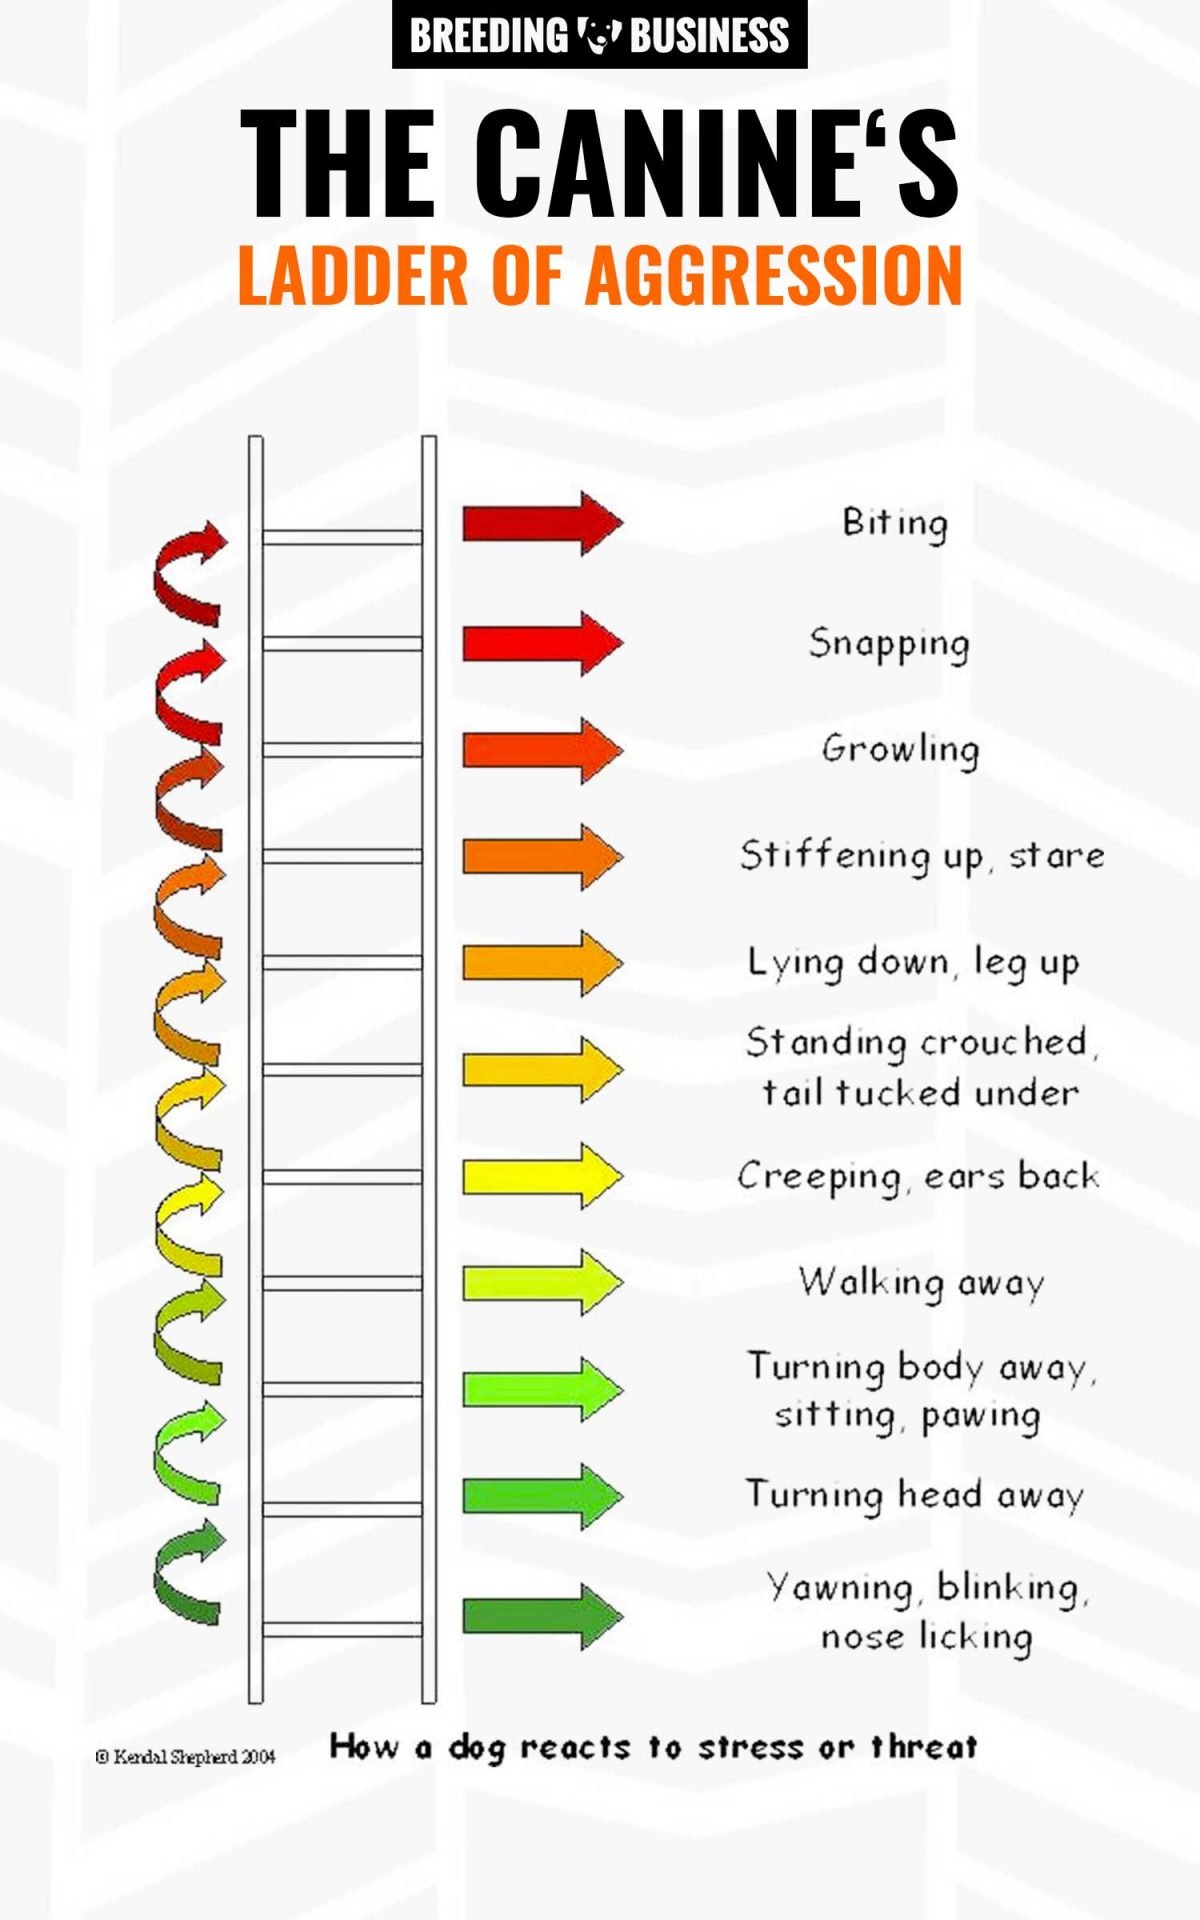 Ladder of Aggression in dogs